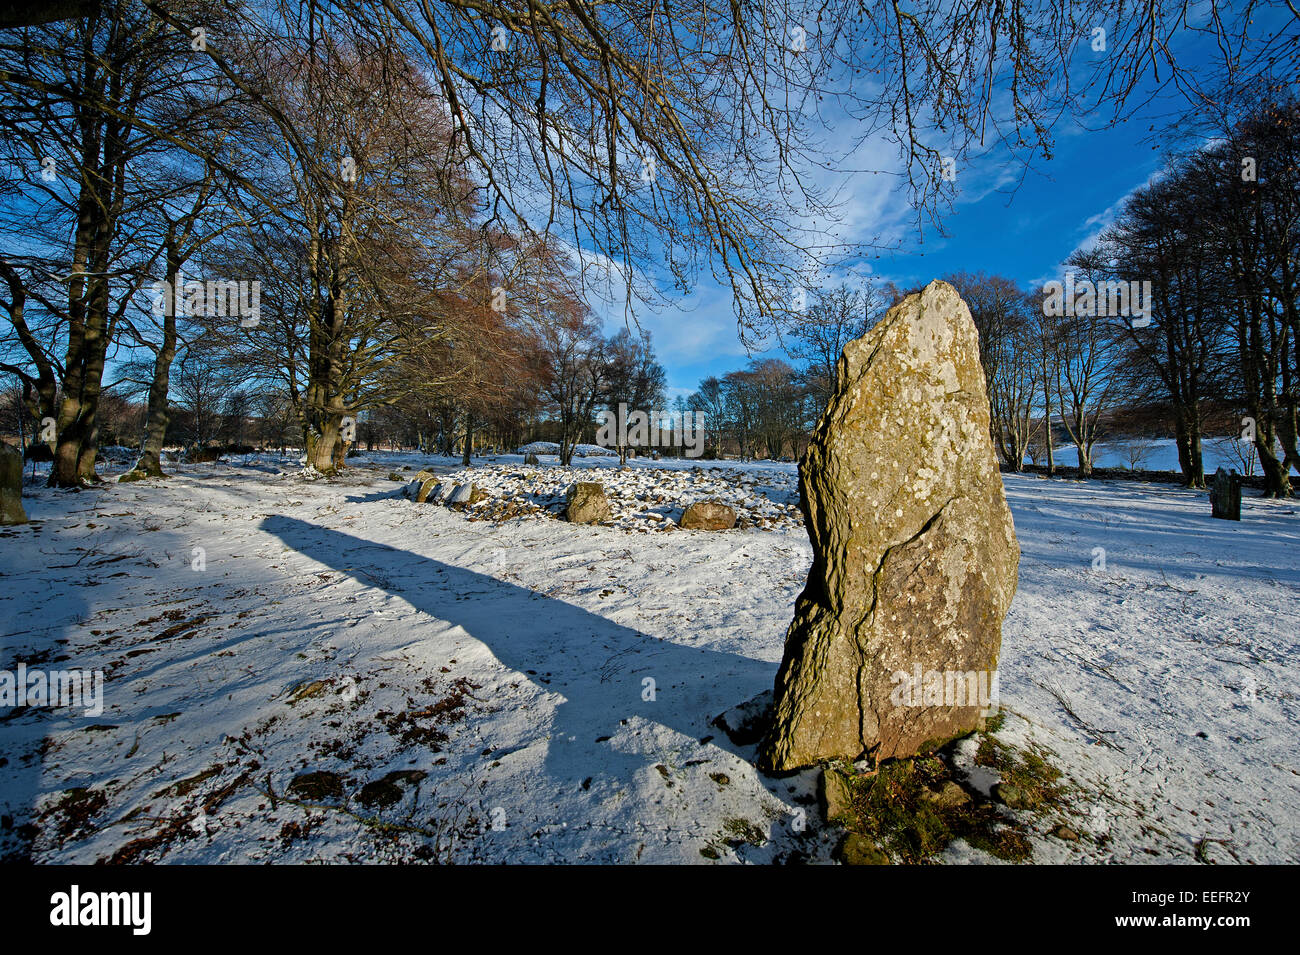 4000 Year old Prehistoric Burial Cairns of Bulnuaran of Clava,near Culloden, Inverness. Scotland.  SCO 9426. Stock Photo